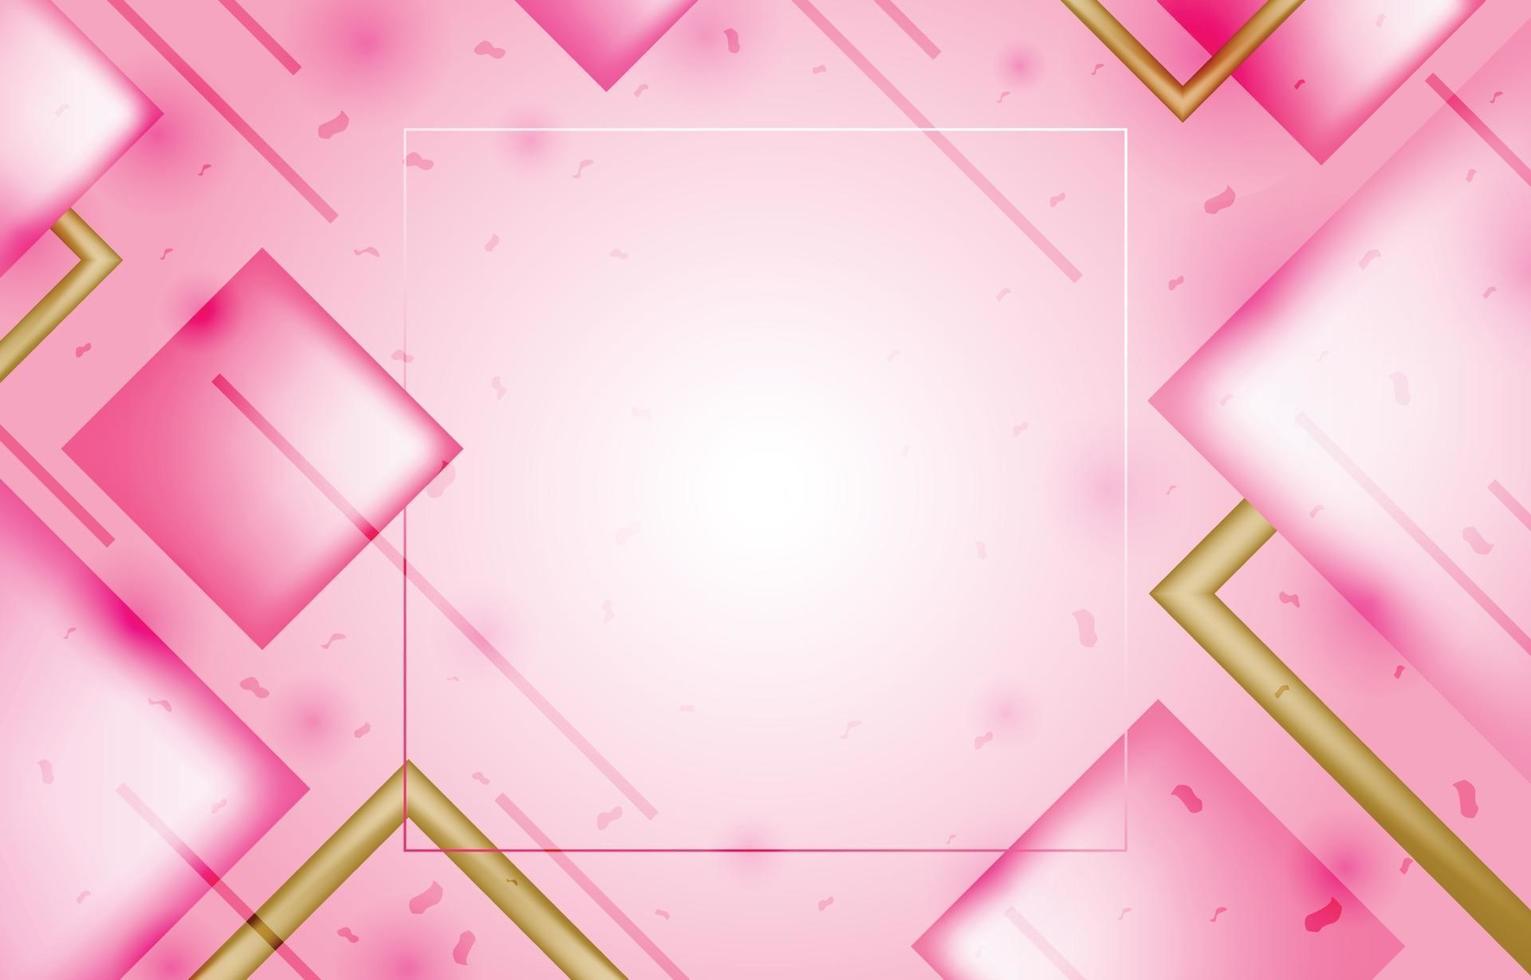 Geometric Pink Background Template vector